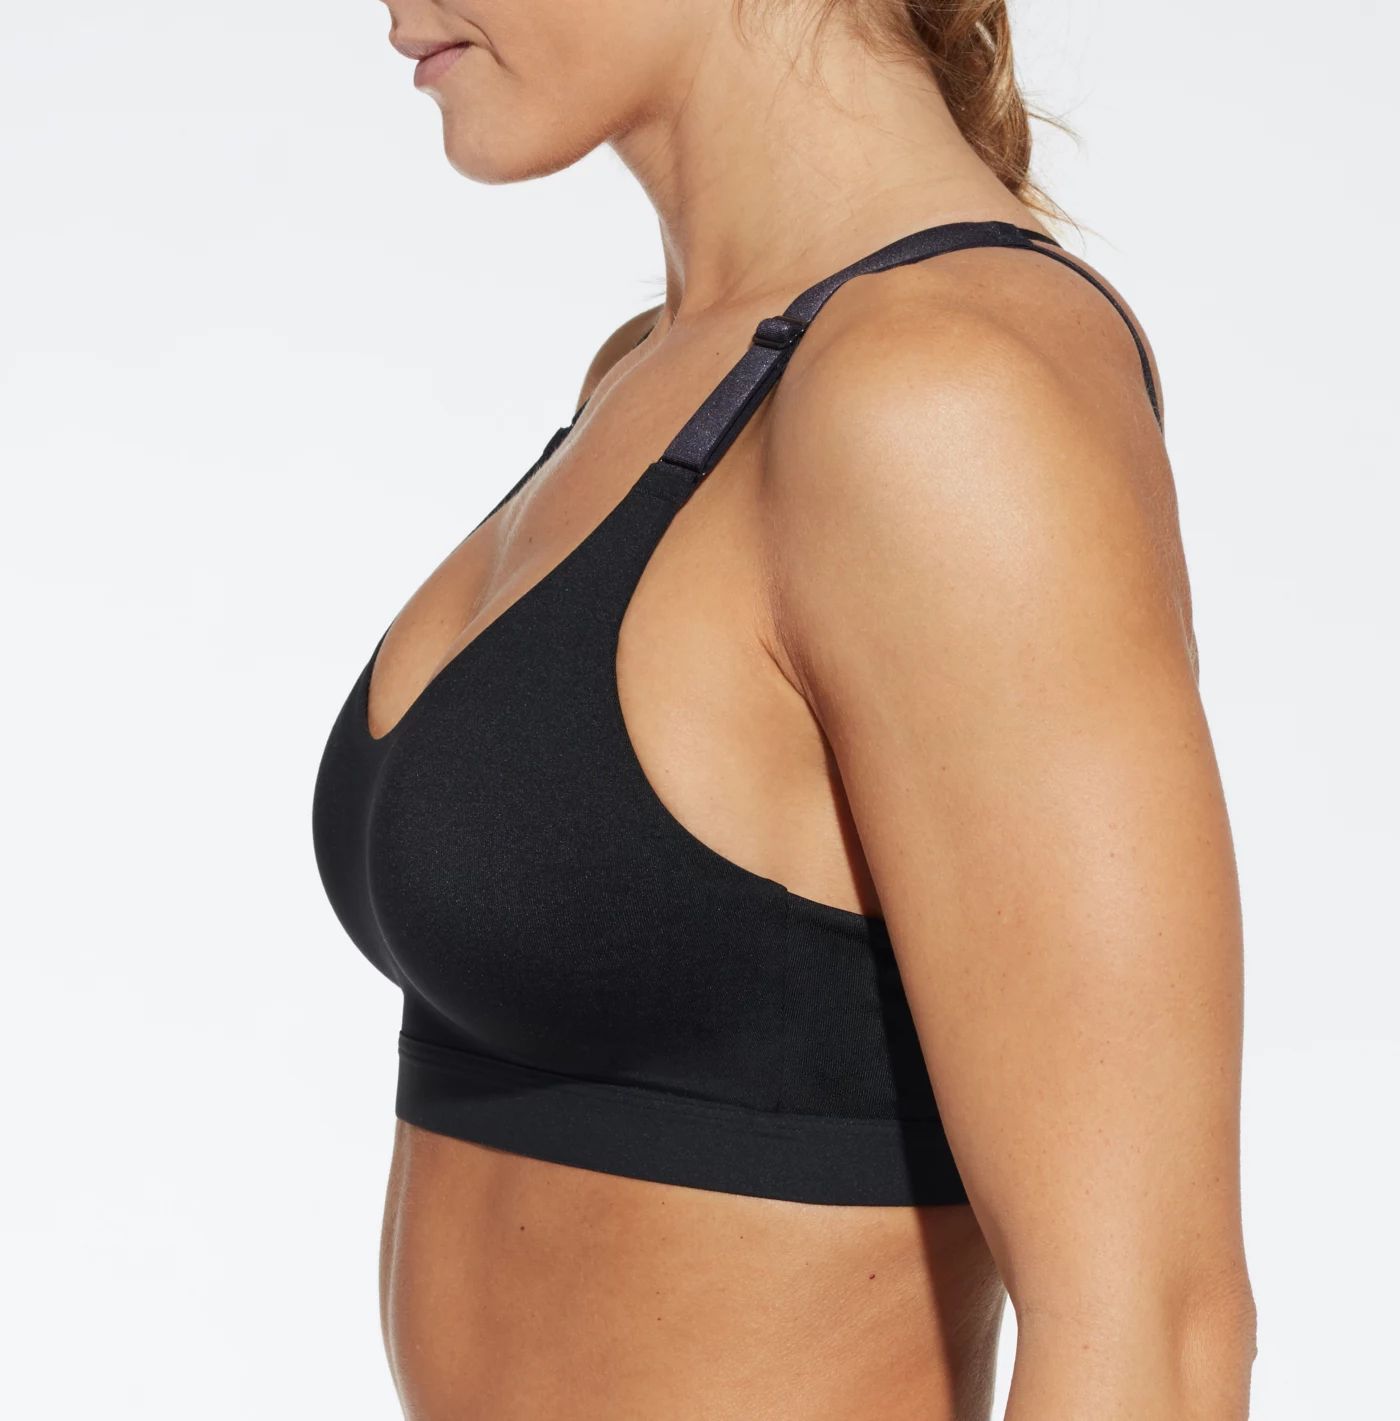 CALIA by Carrie Underwood Women's Focus Strappy Sports Bra | Dick's Sporting Goods